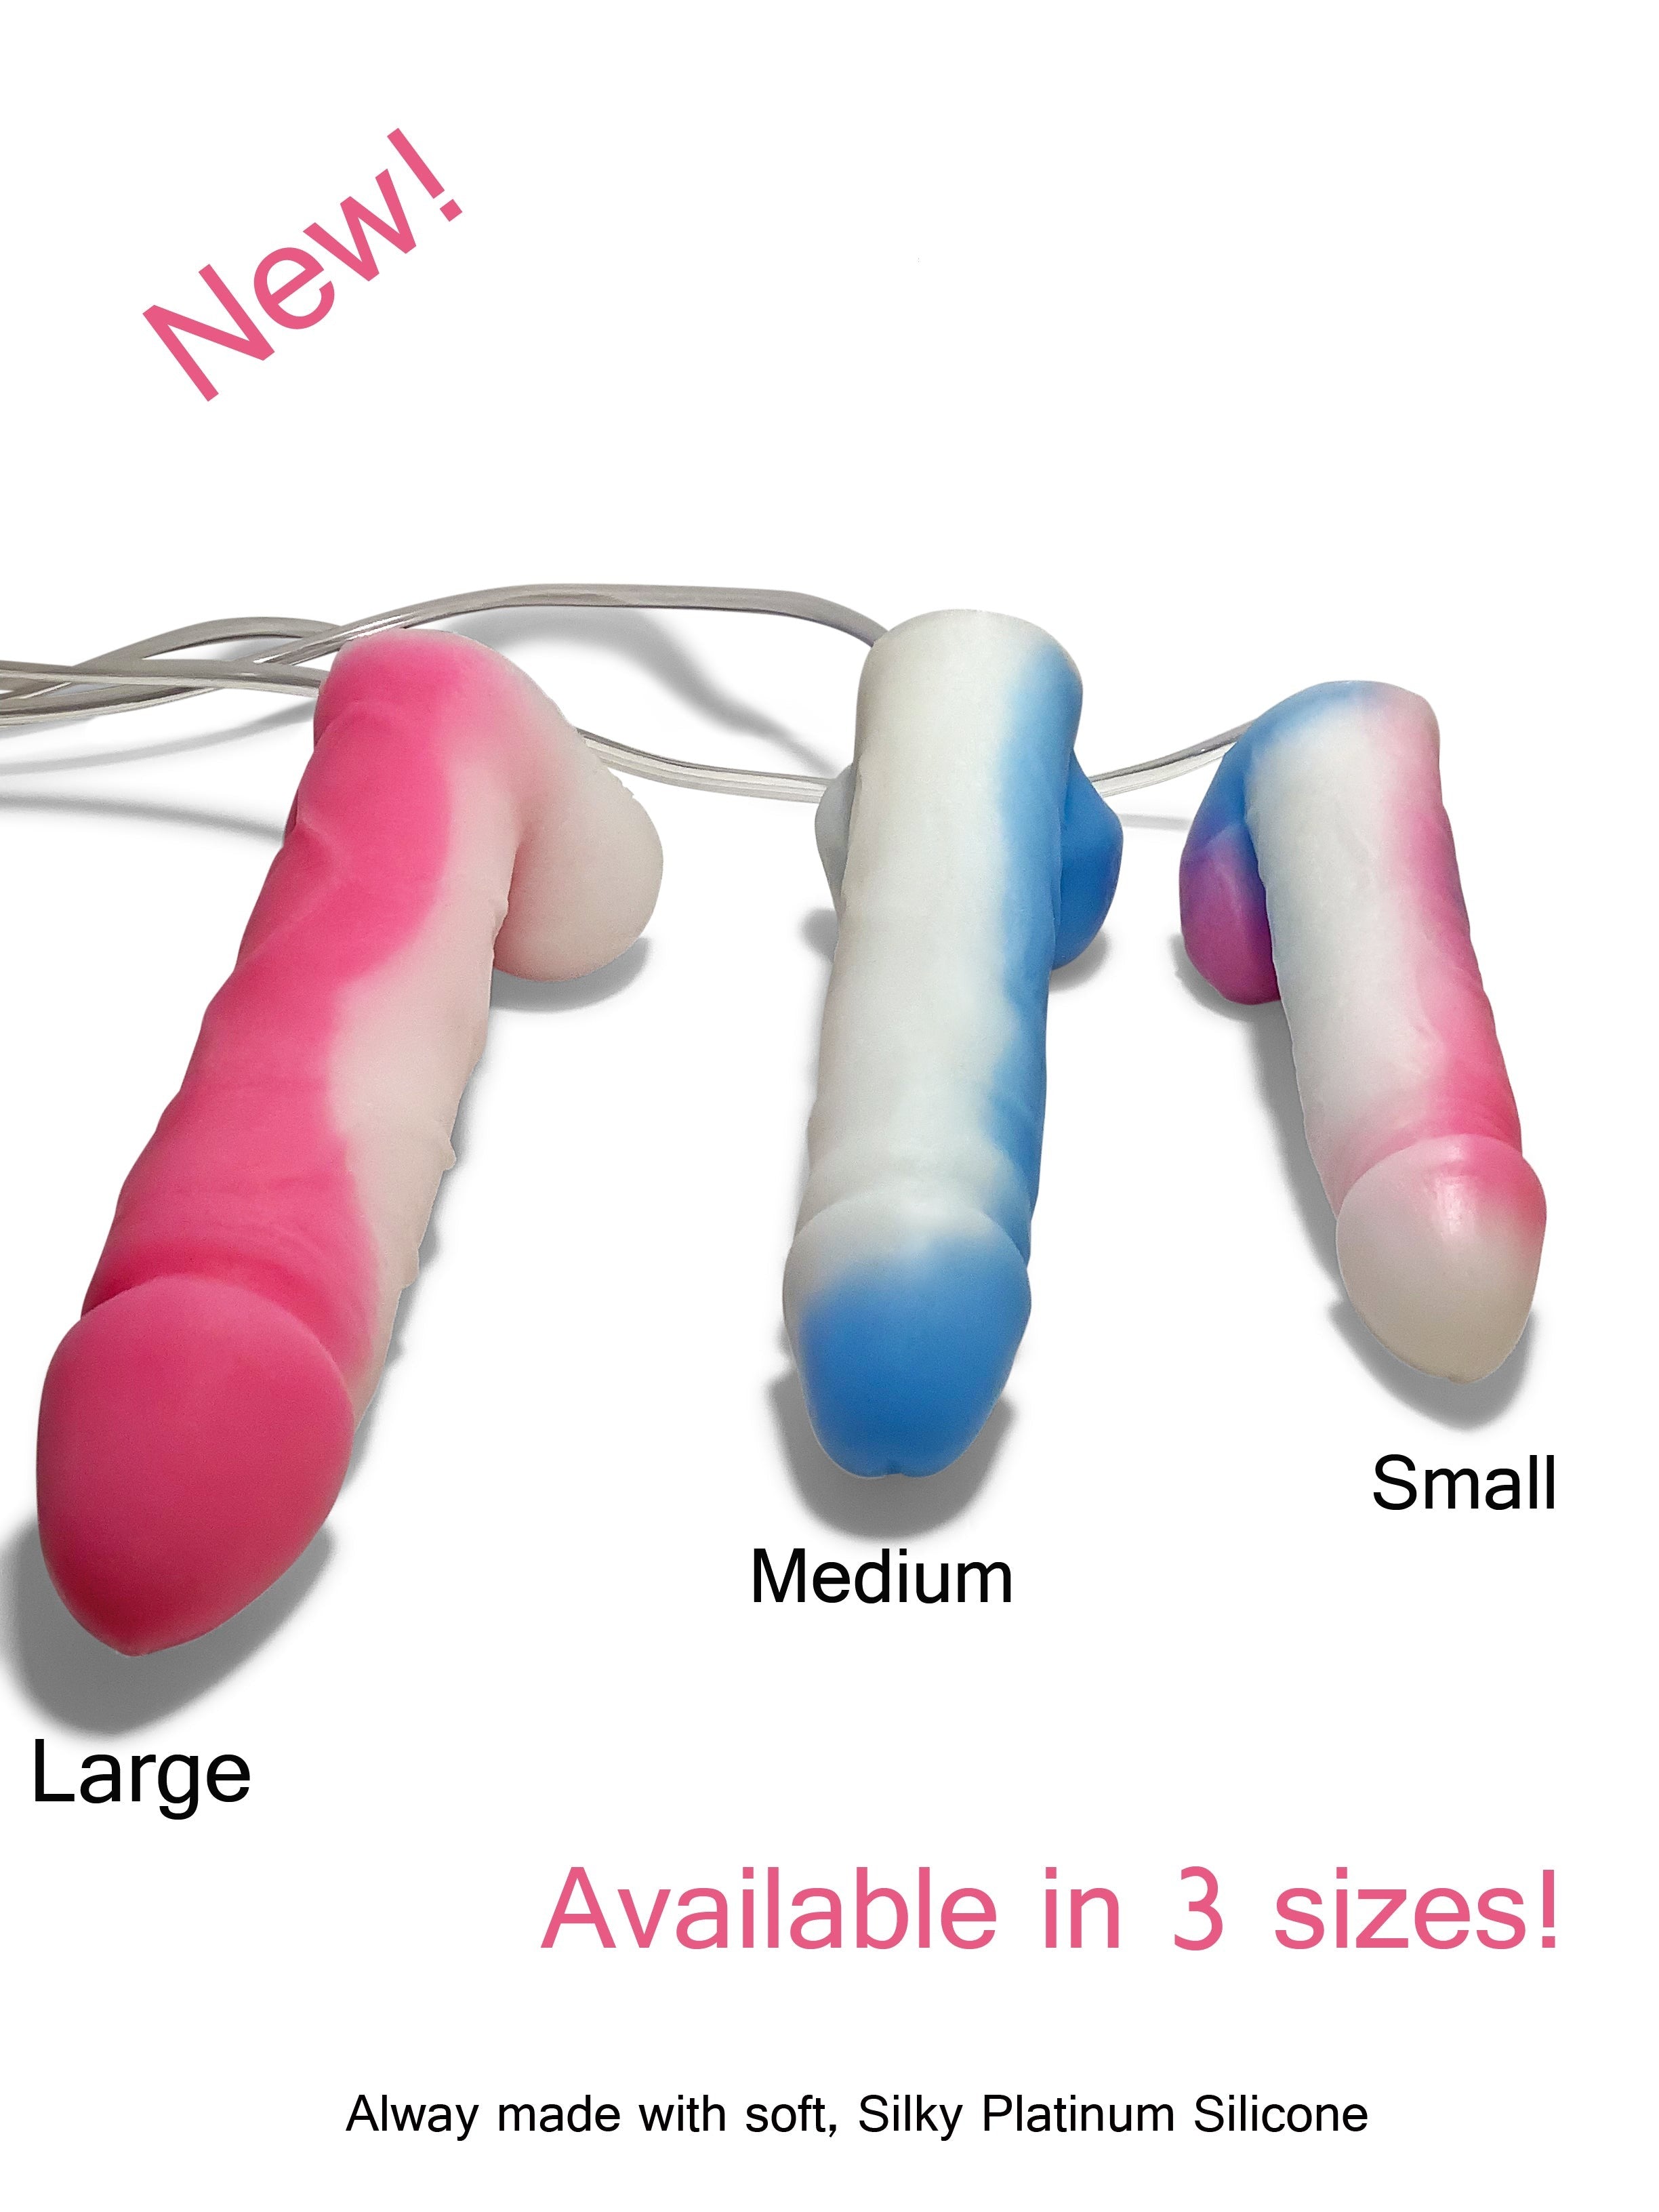 Squirting Dildo Ejaculating “Pinky XL” Penis sex toy super soft platin